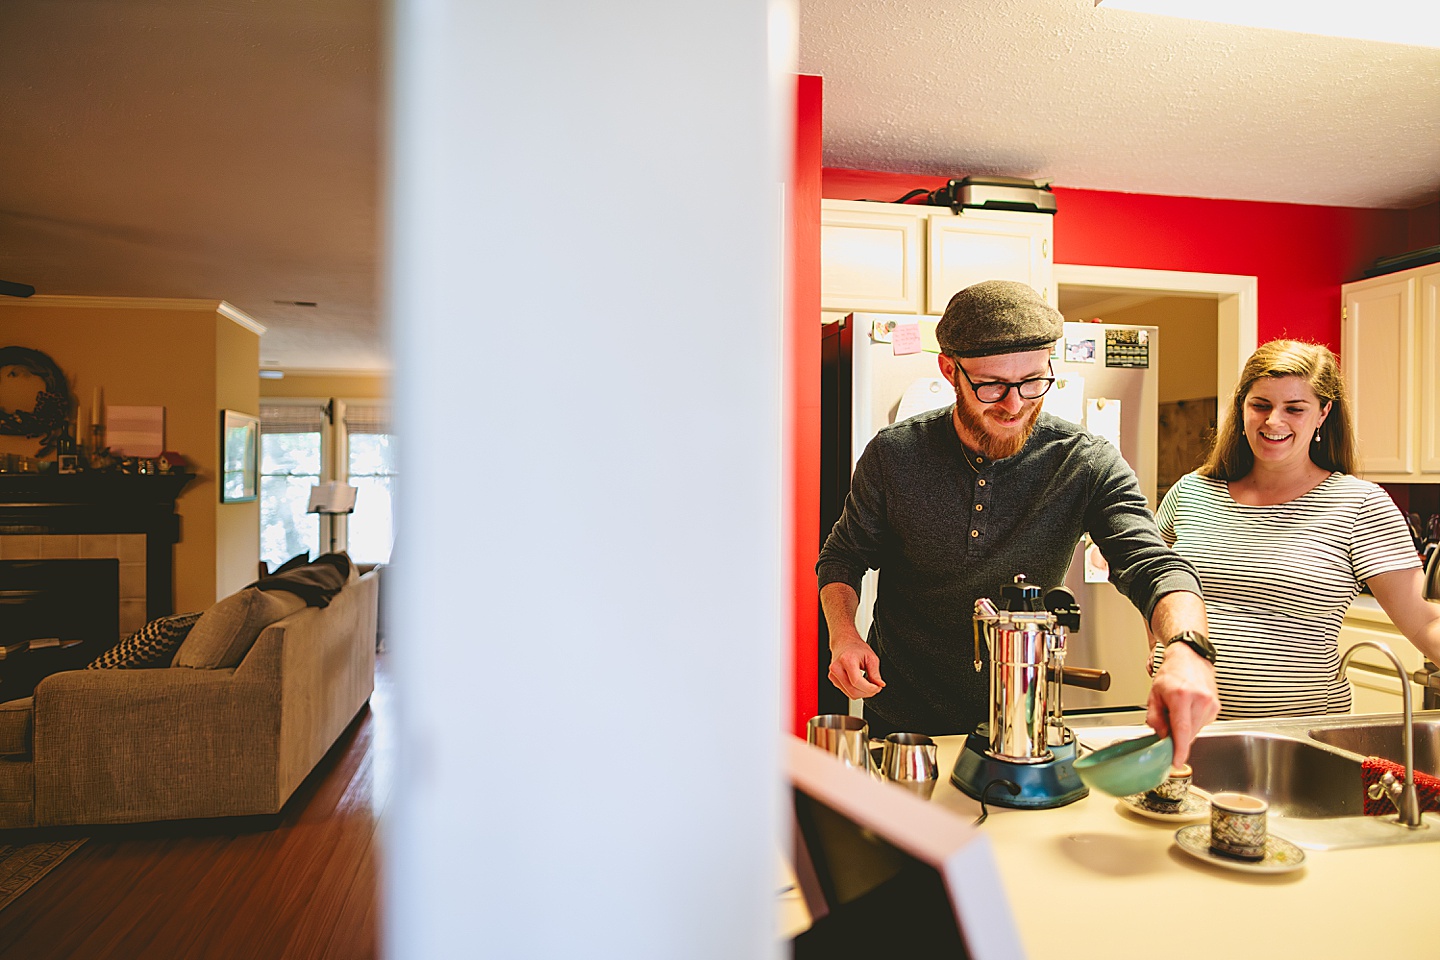 Couple making coffee in a red kitchen